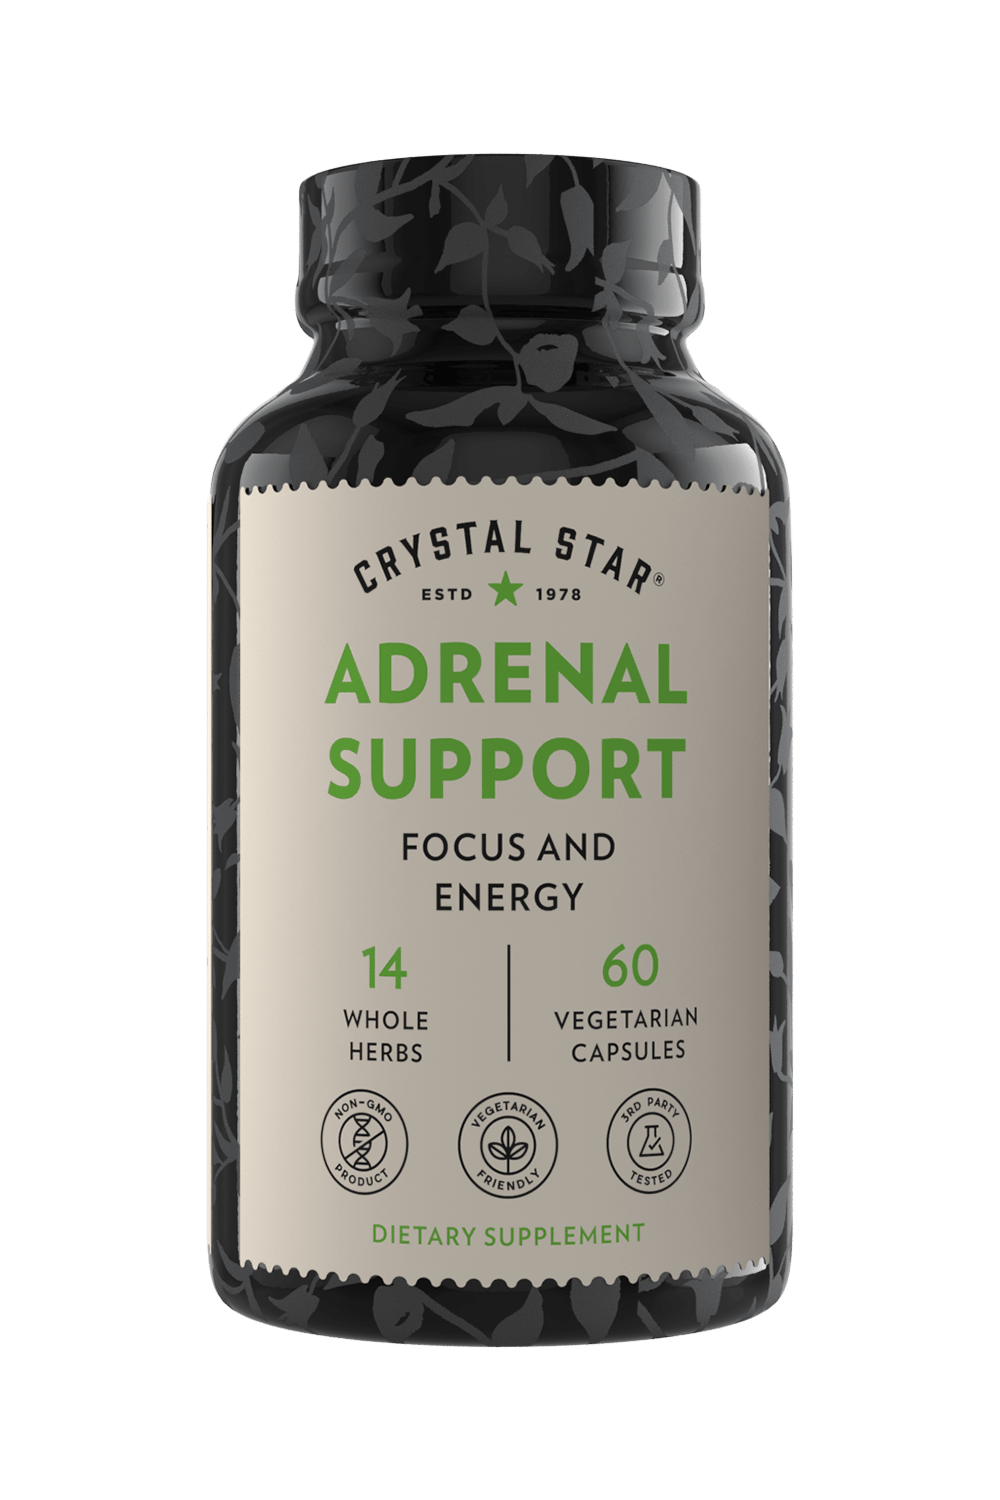 Crystal Star Adrenal Support, Adrenal Energy, Anxiety, stress, stress relieve, adrenal fatigue, fatigue, adrenals, adrenal support, exhaustion, nervous energy, overwhelm, daily stress, adrenal energy, adaptogen, adrenal, cortisol